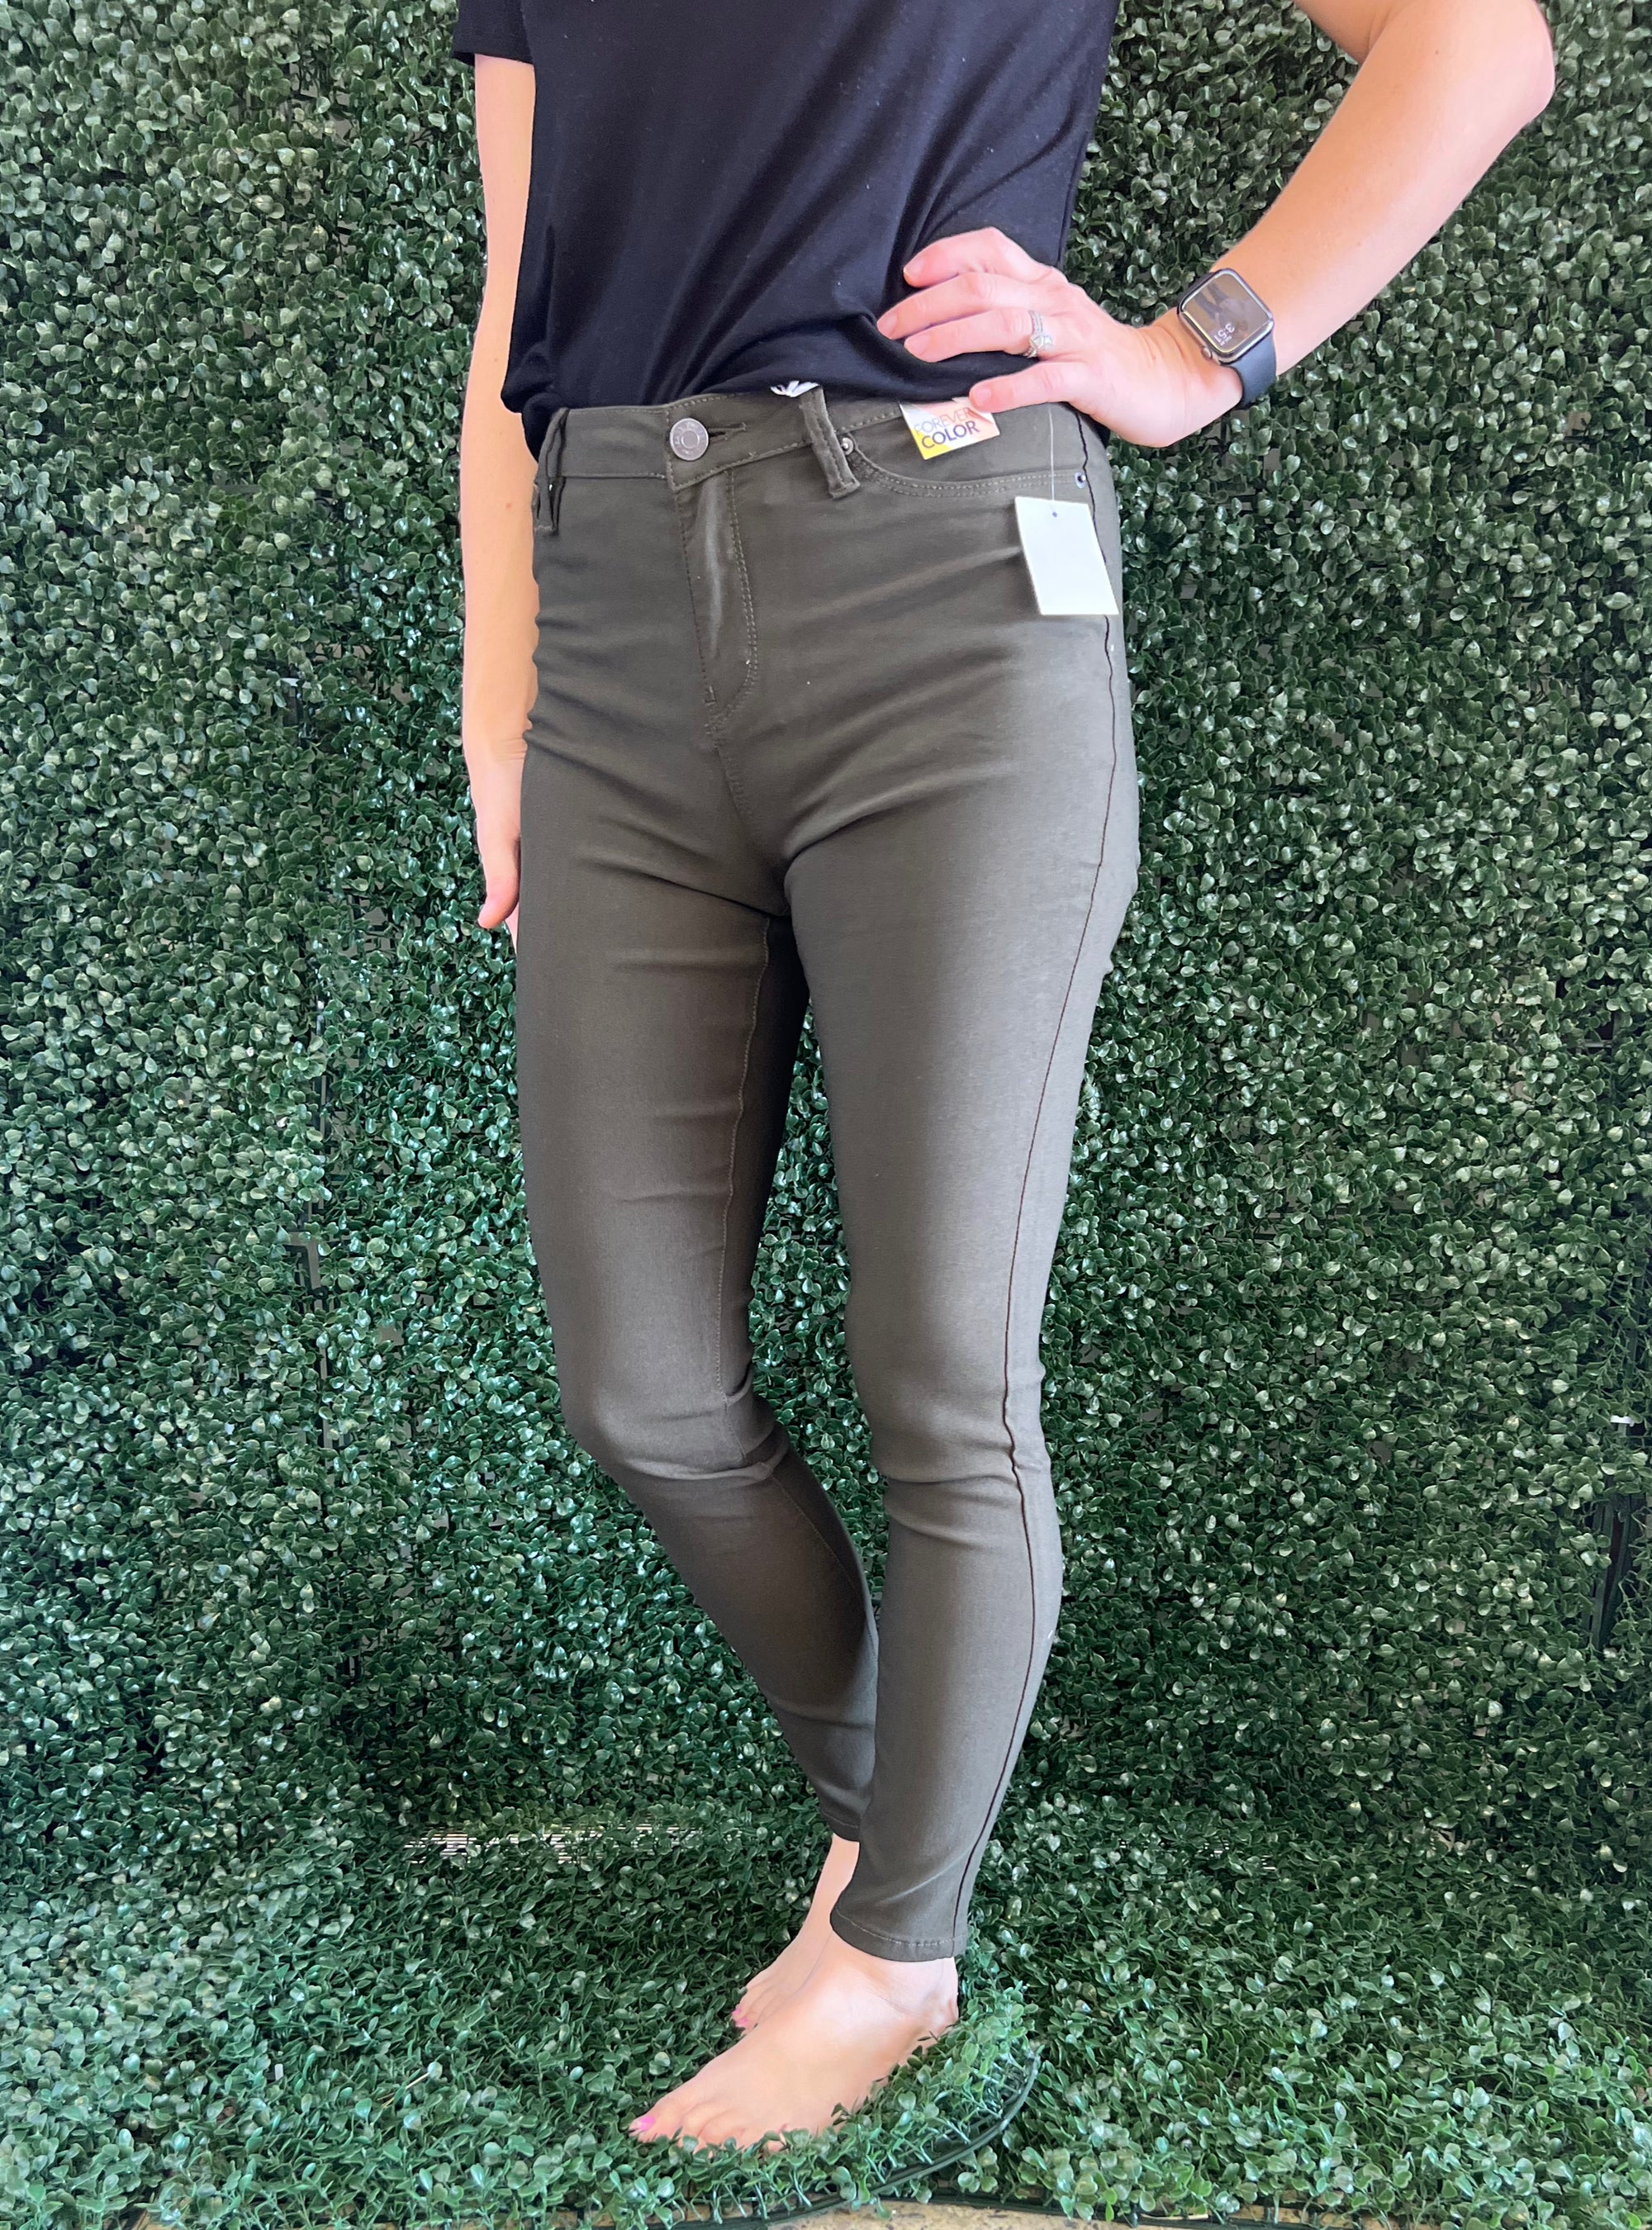 *Best Selling Skinny Jeans* Olive